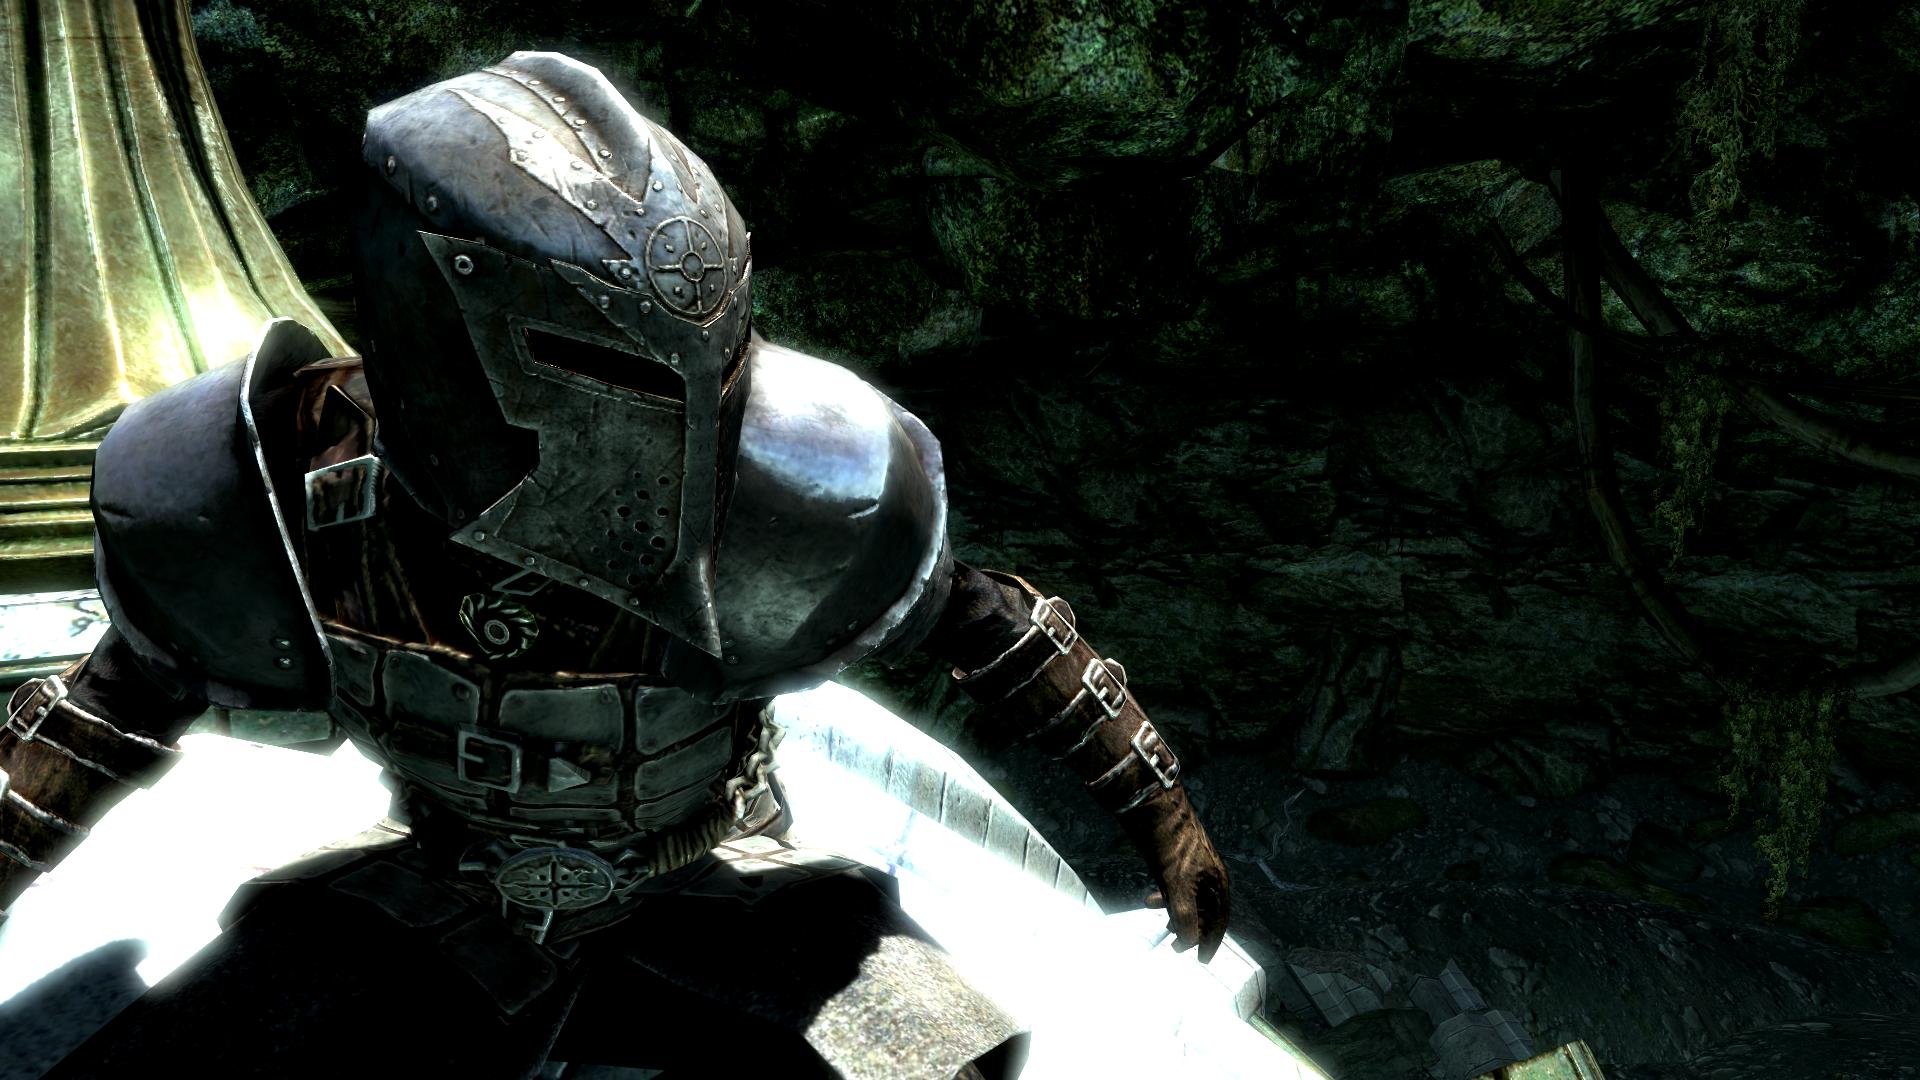 Skyrim Dawnguard Armor Wallpaper Image Amp Pictures Becuo